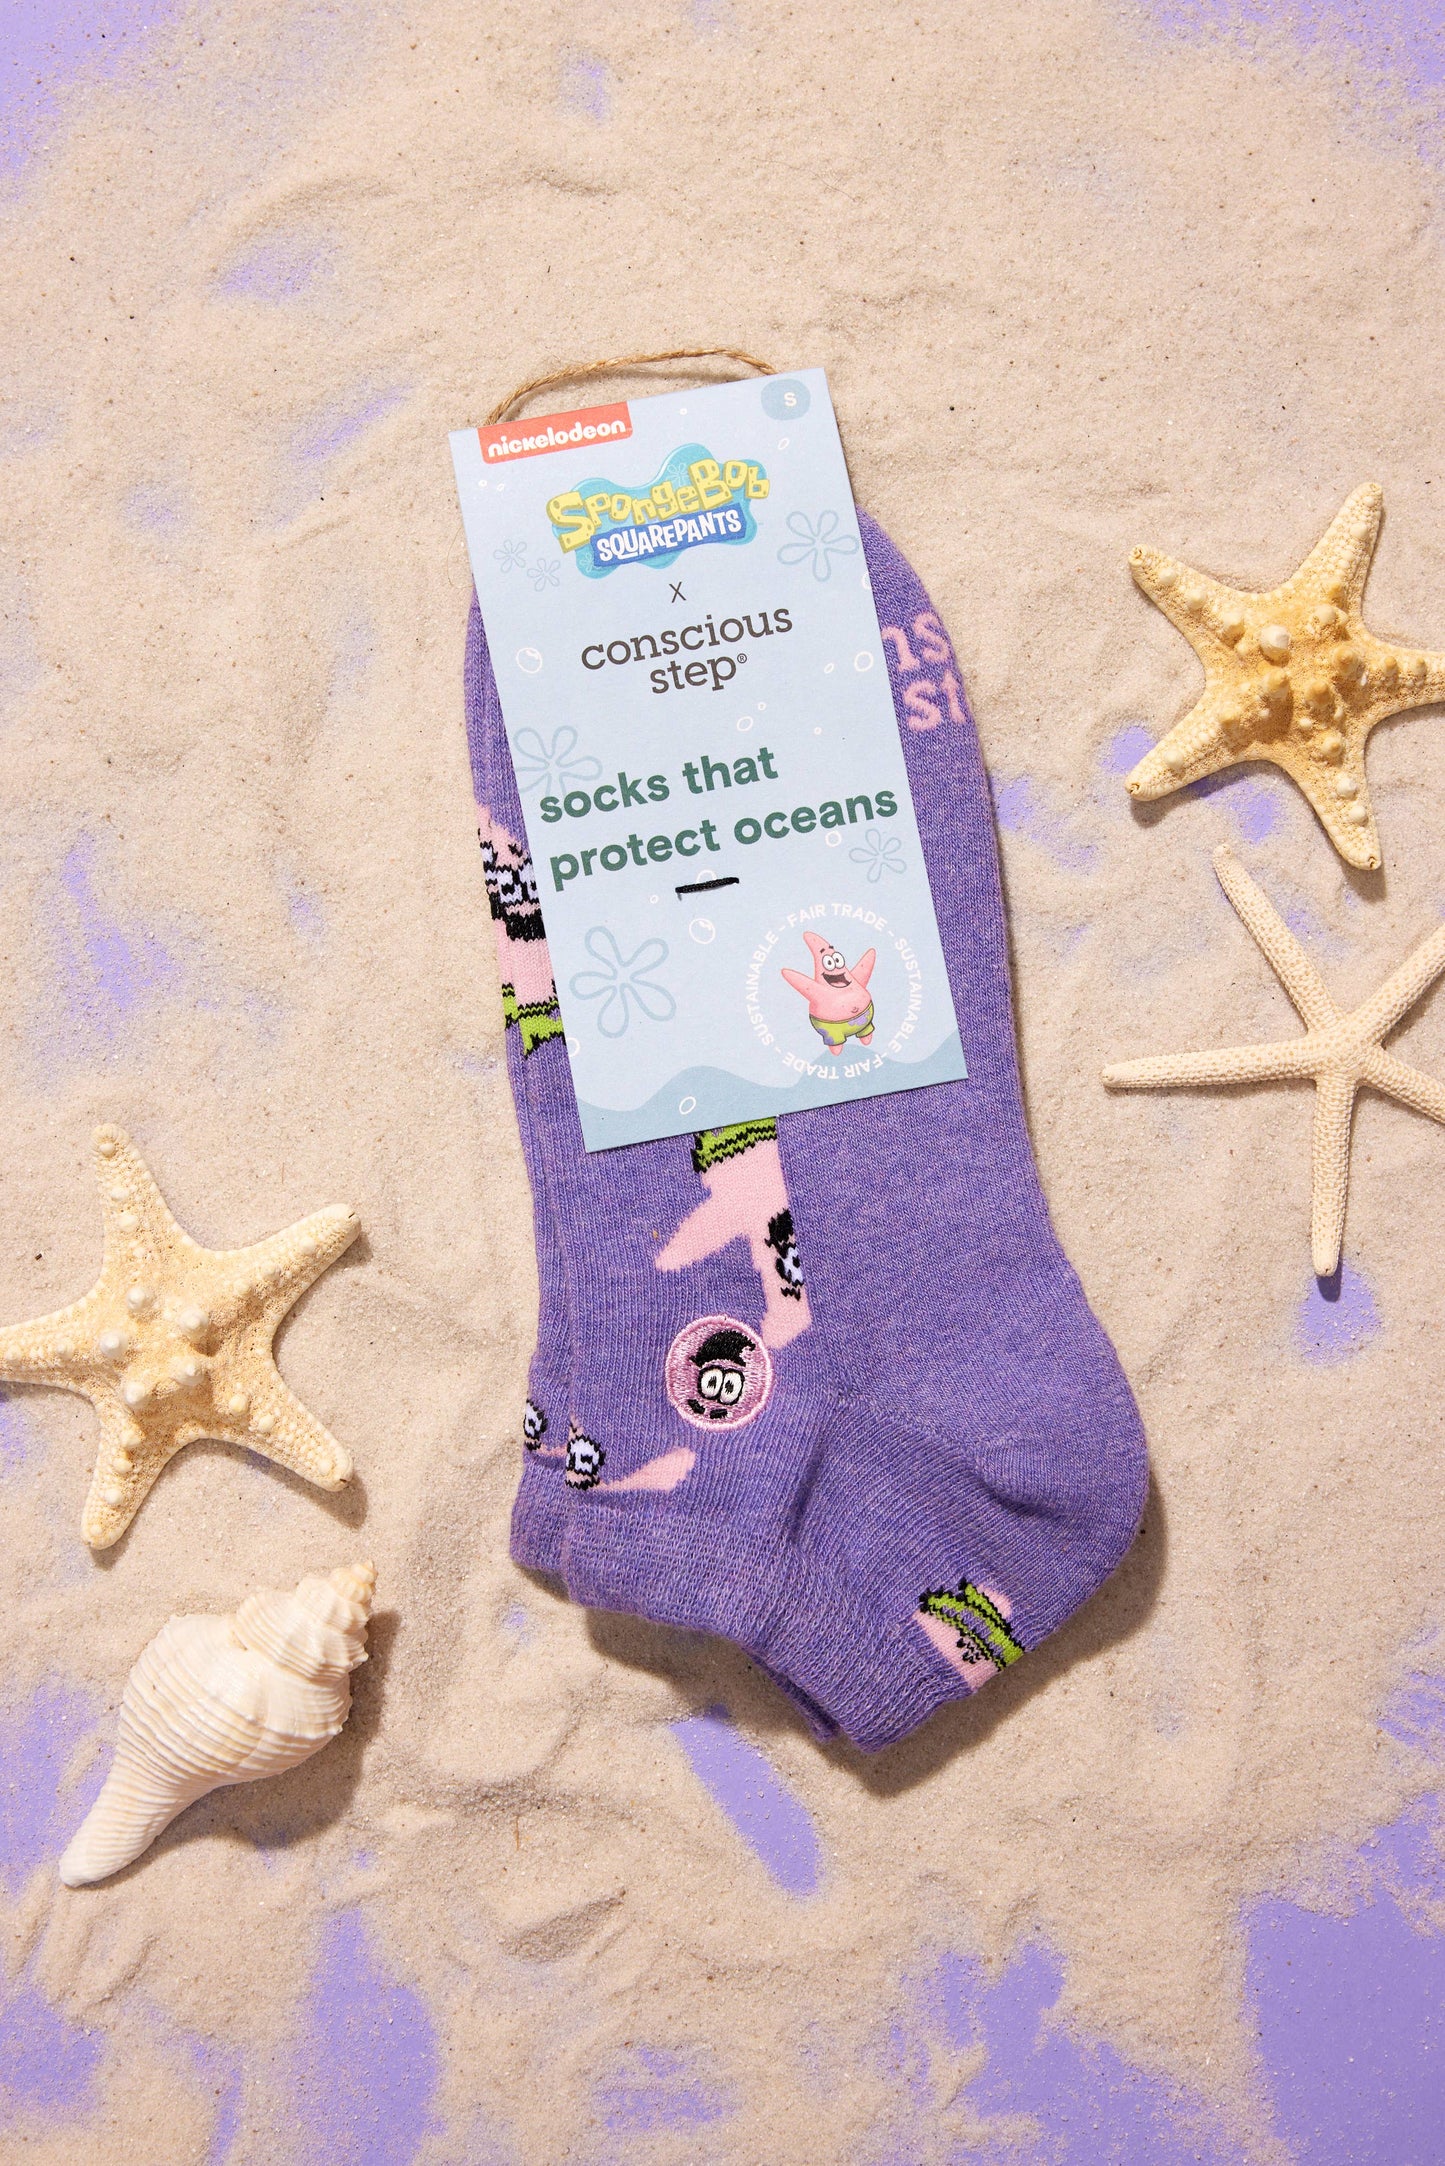 Patrick Ankle Socks that Protect Oceans